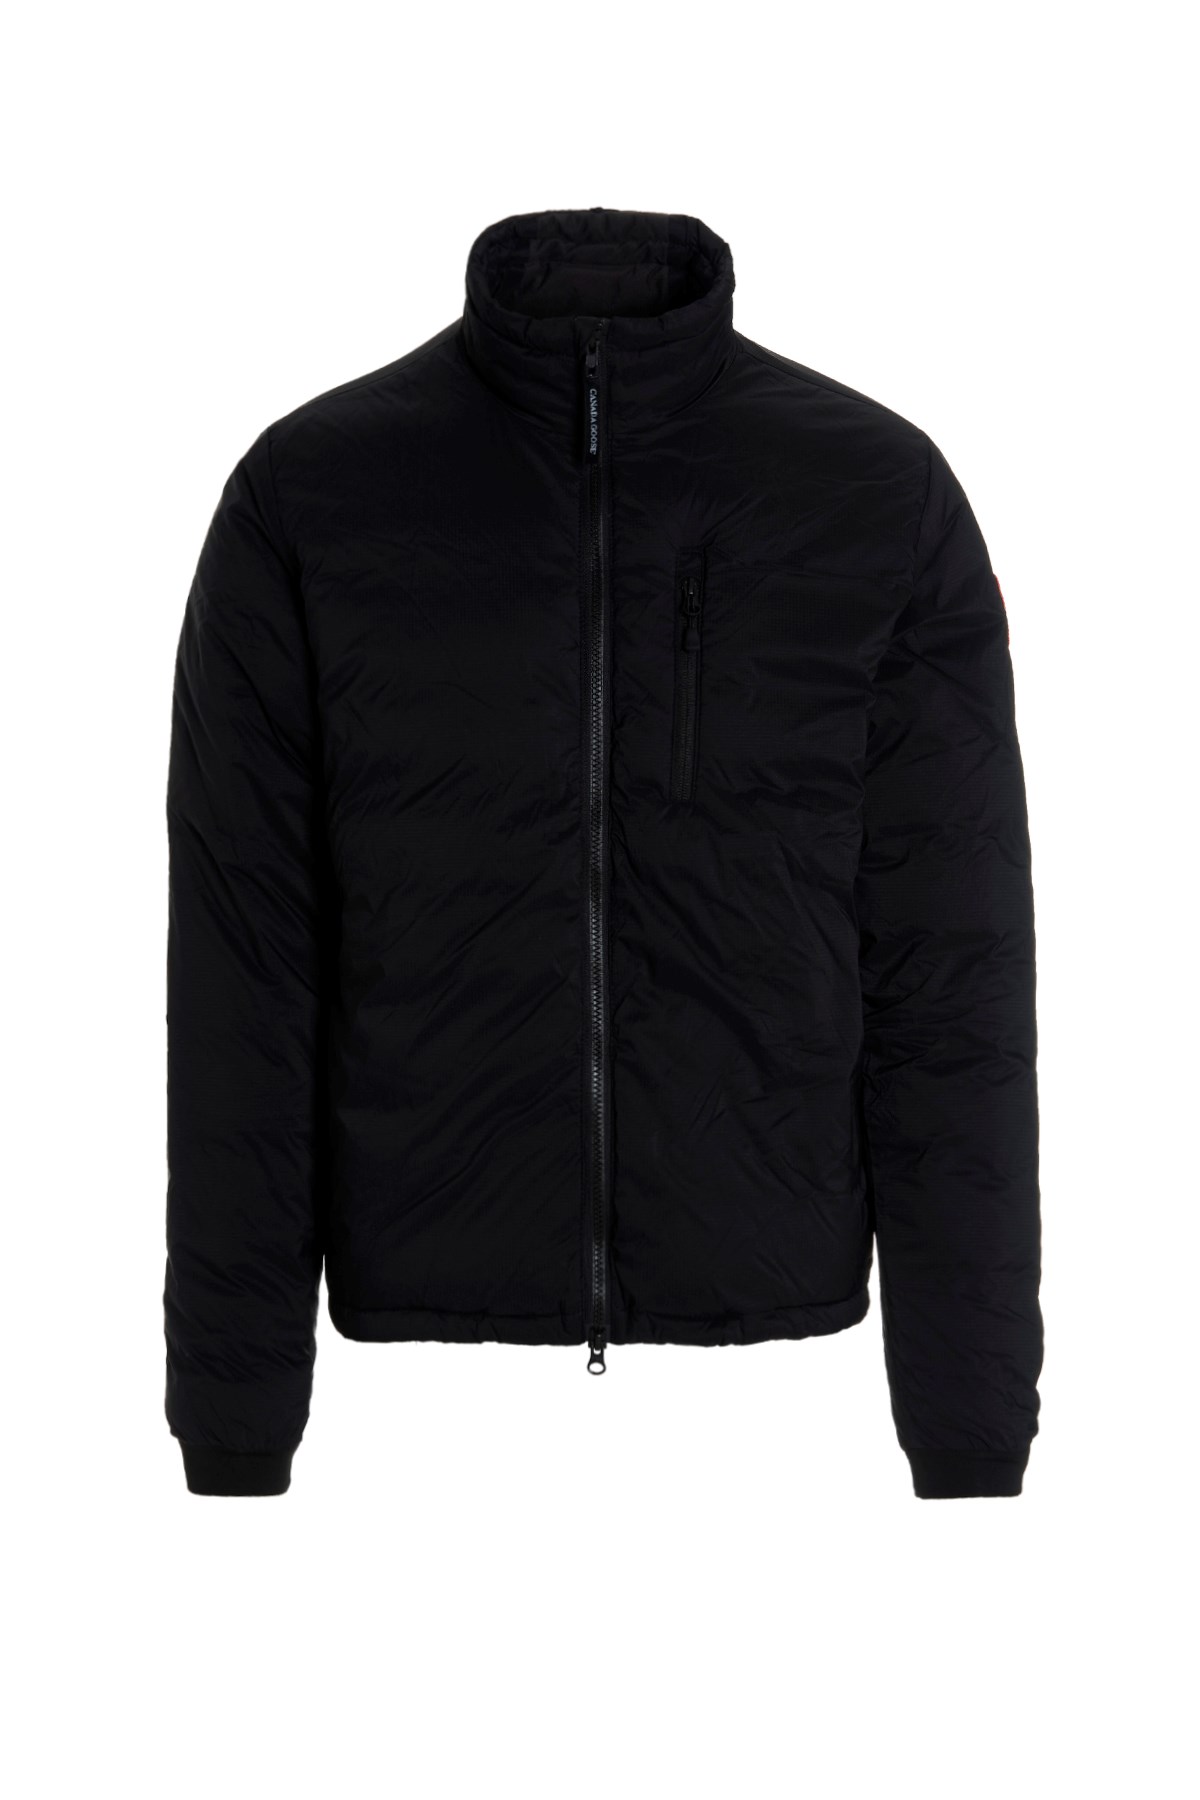 CANADA GOOSE 'Lodge' Down Jacket